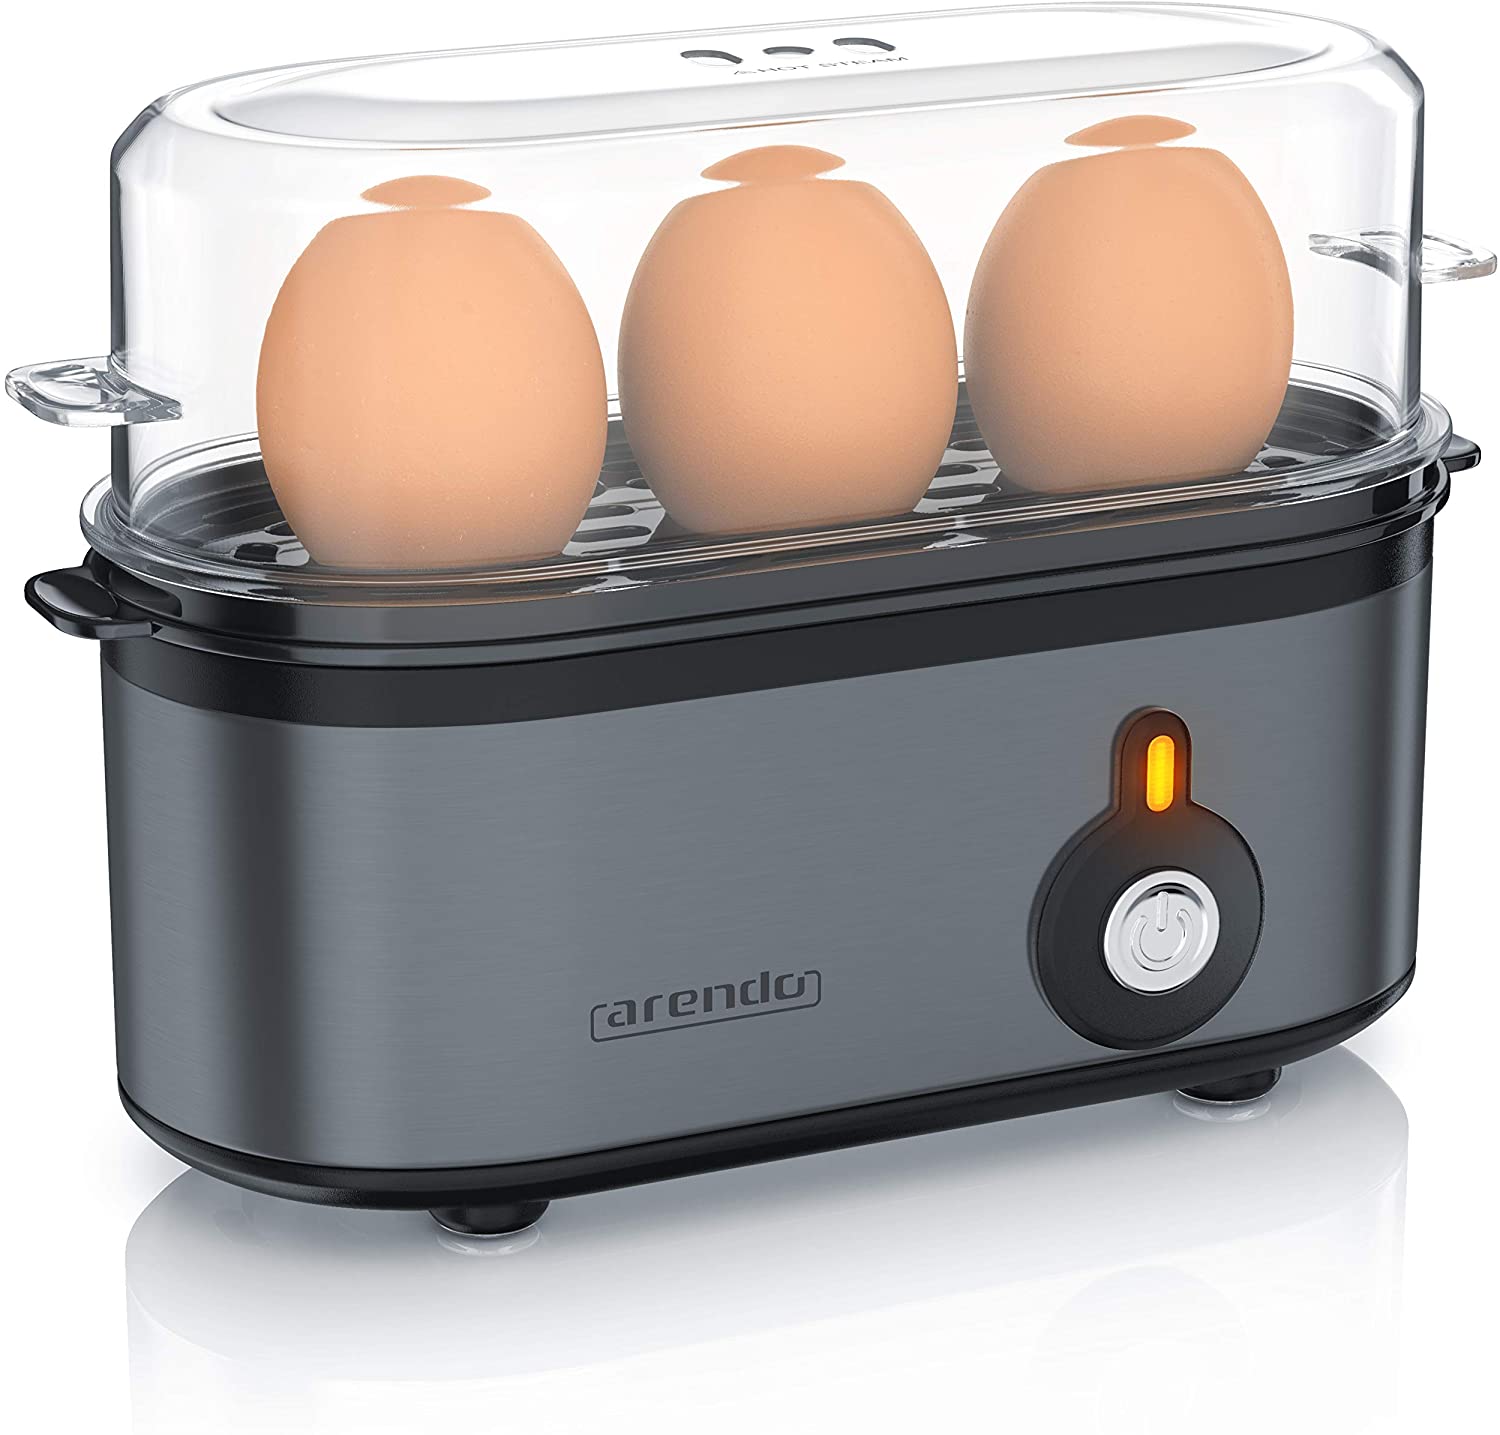 Arendo-Threecook stainless steel egg cooker - an off switch-selectable degr